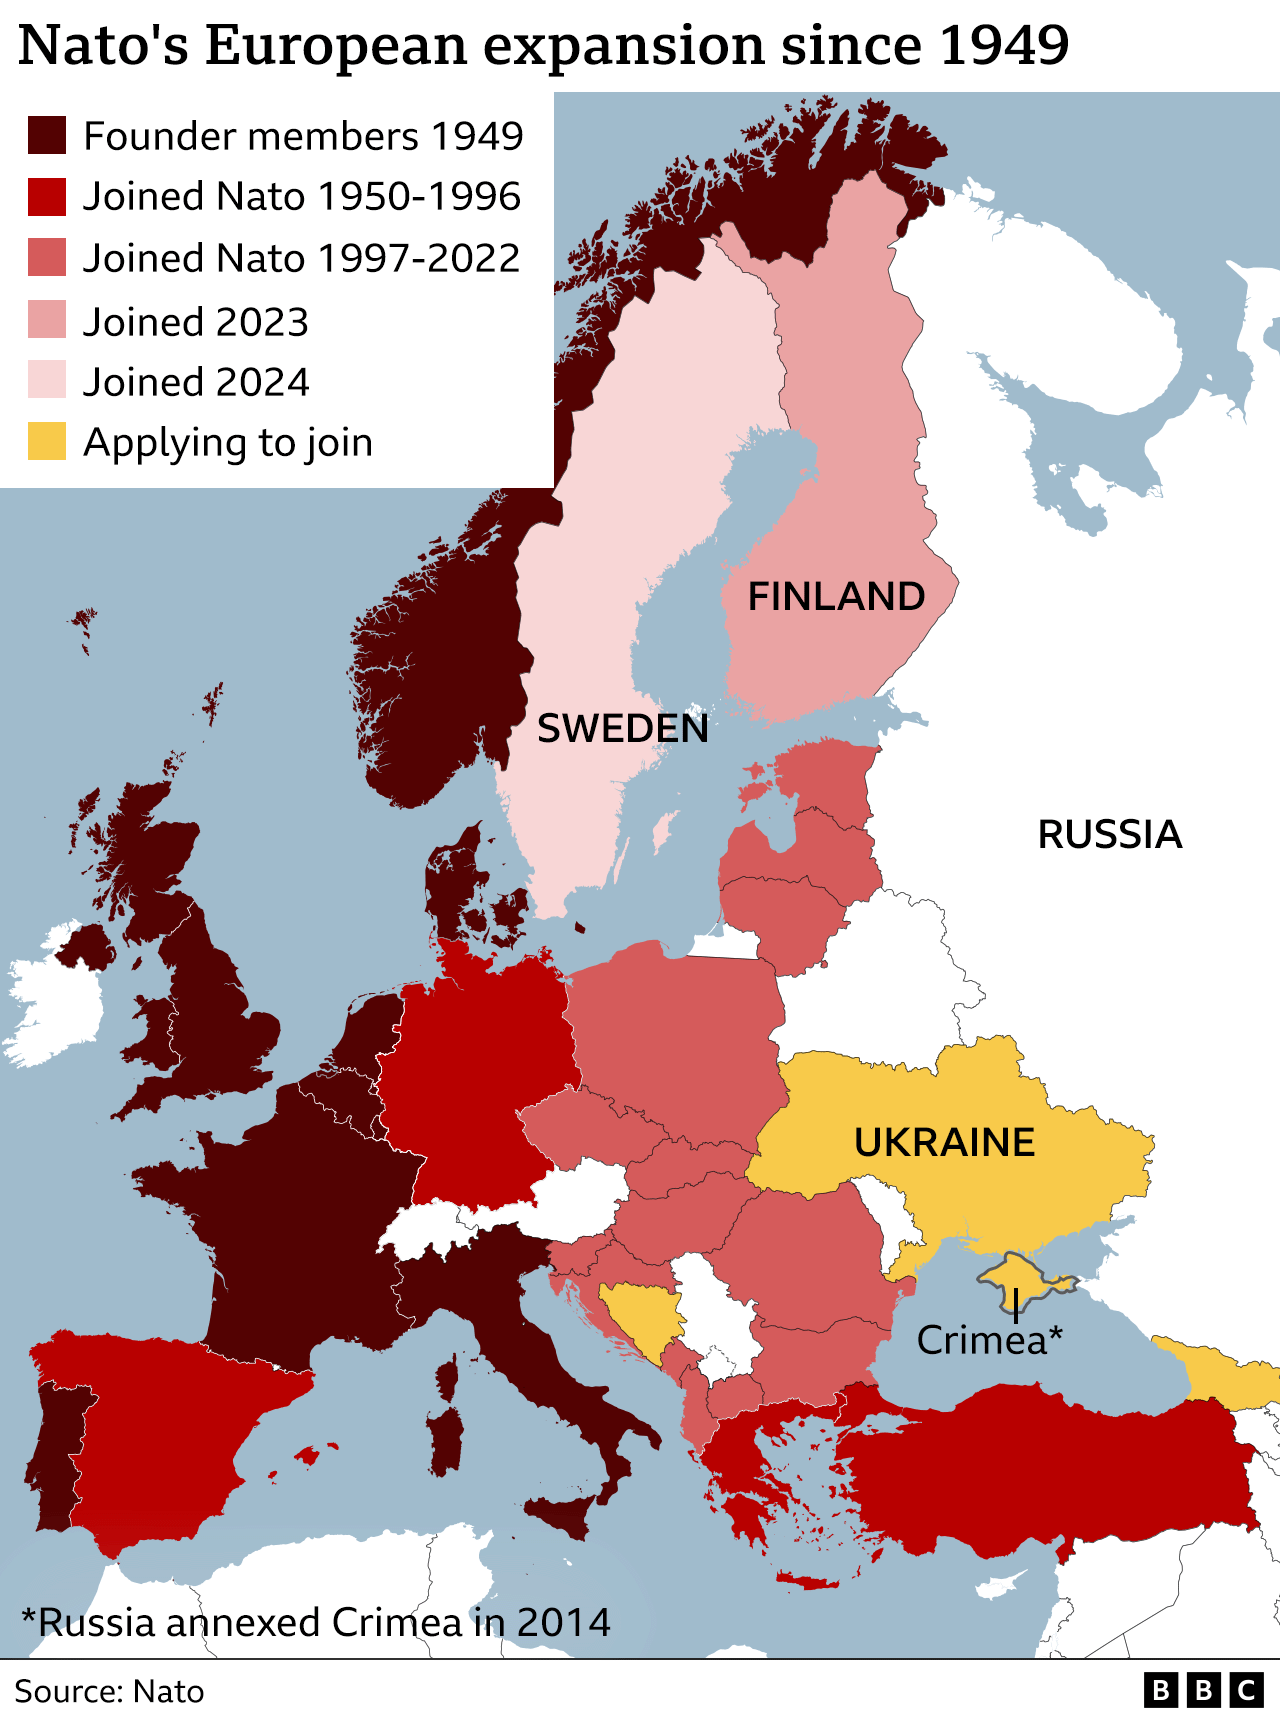 Map illustrating Nato's European expansion since 1949